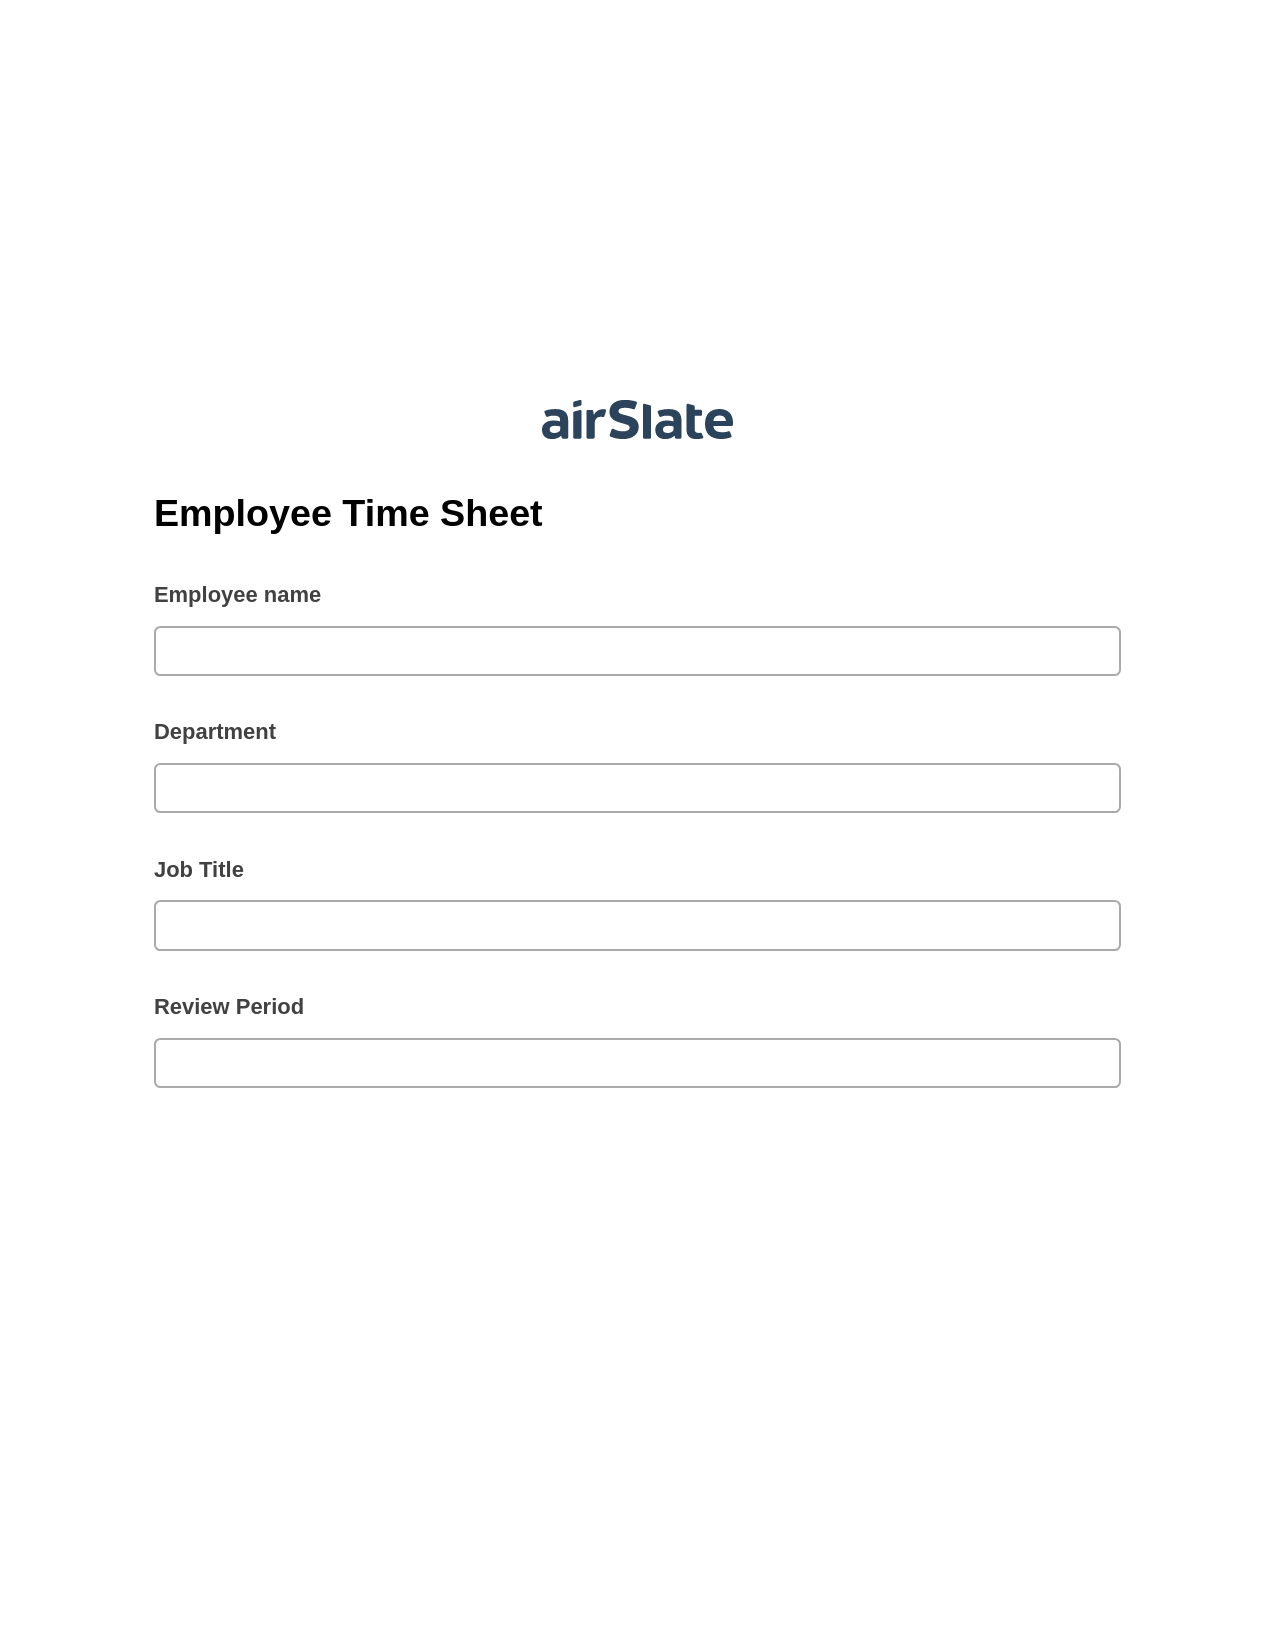 Multirole Employee Time Sheet Prefill from NetSuite records, Create Salesforce Records Bot, Archive to SharePoint Folder Bot